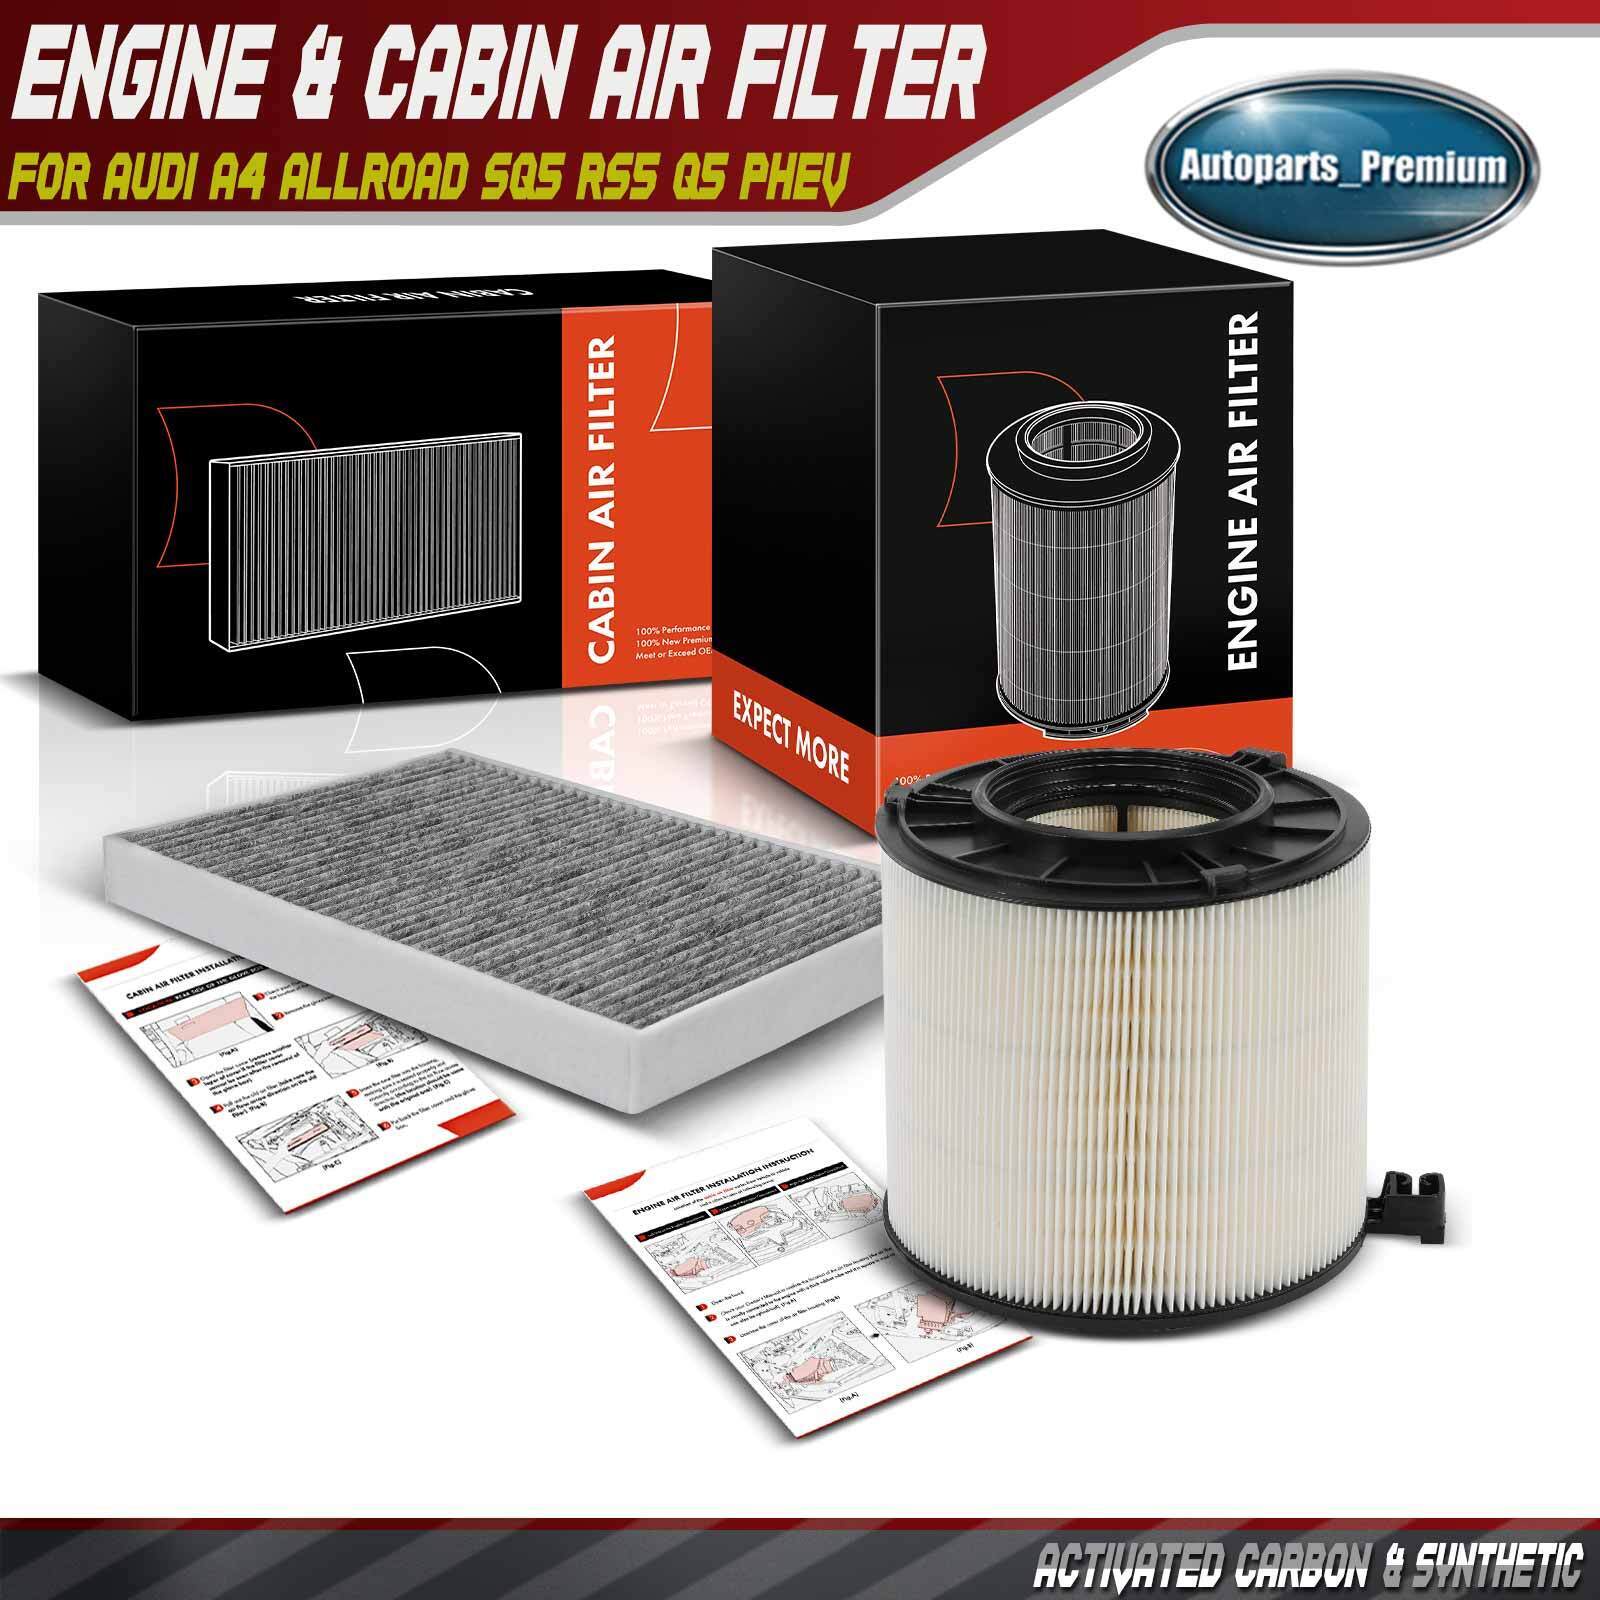 Engine & Activated Carbon Cabin Air Filter for Audi A4 allroad A5 Quattro Q5 RS5